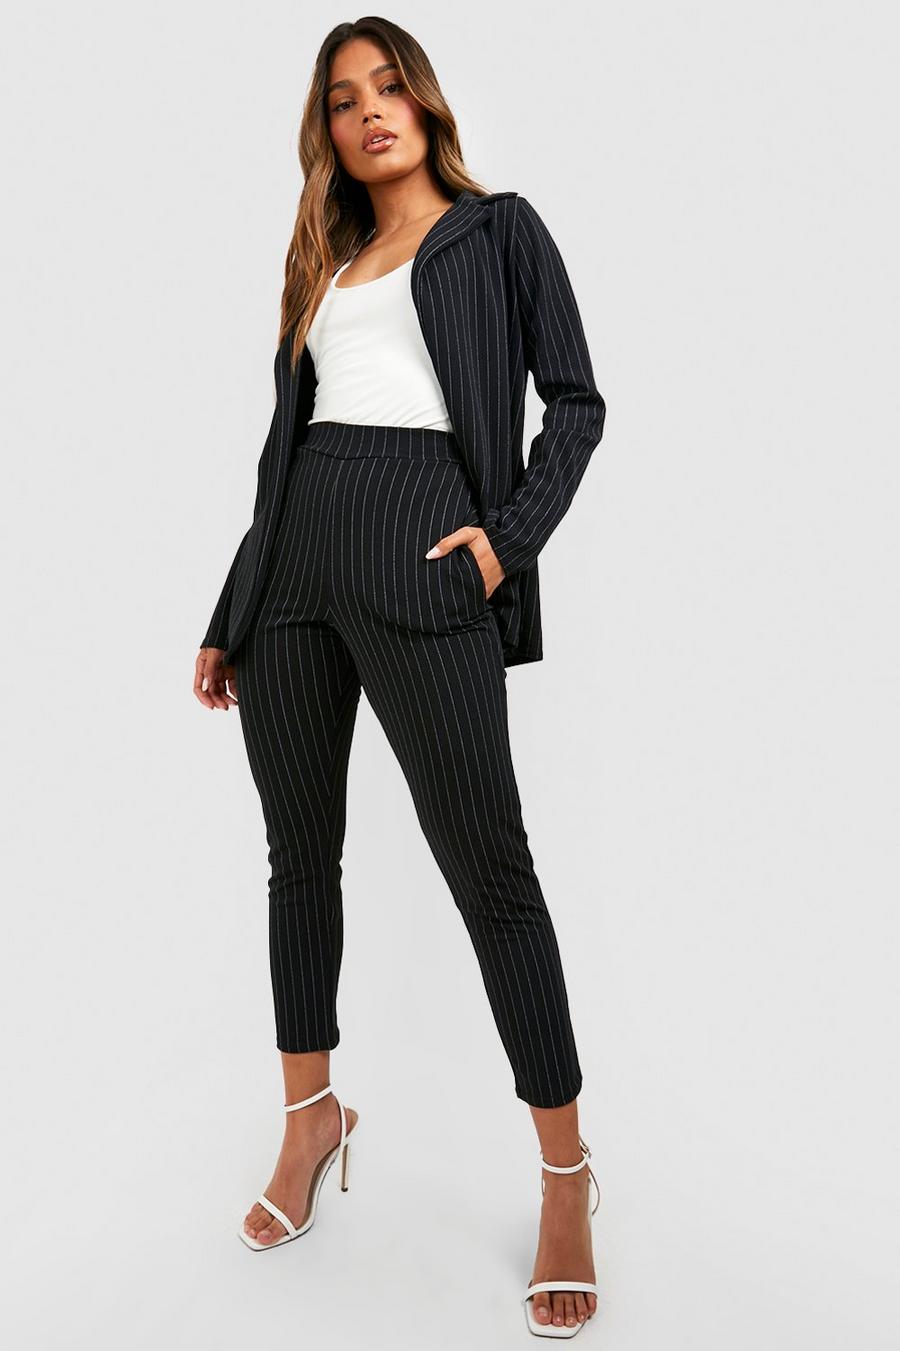 Black schwarz Pinstripe Tailored Blazer And Trouser Co-Ord Suit